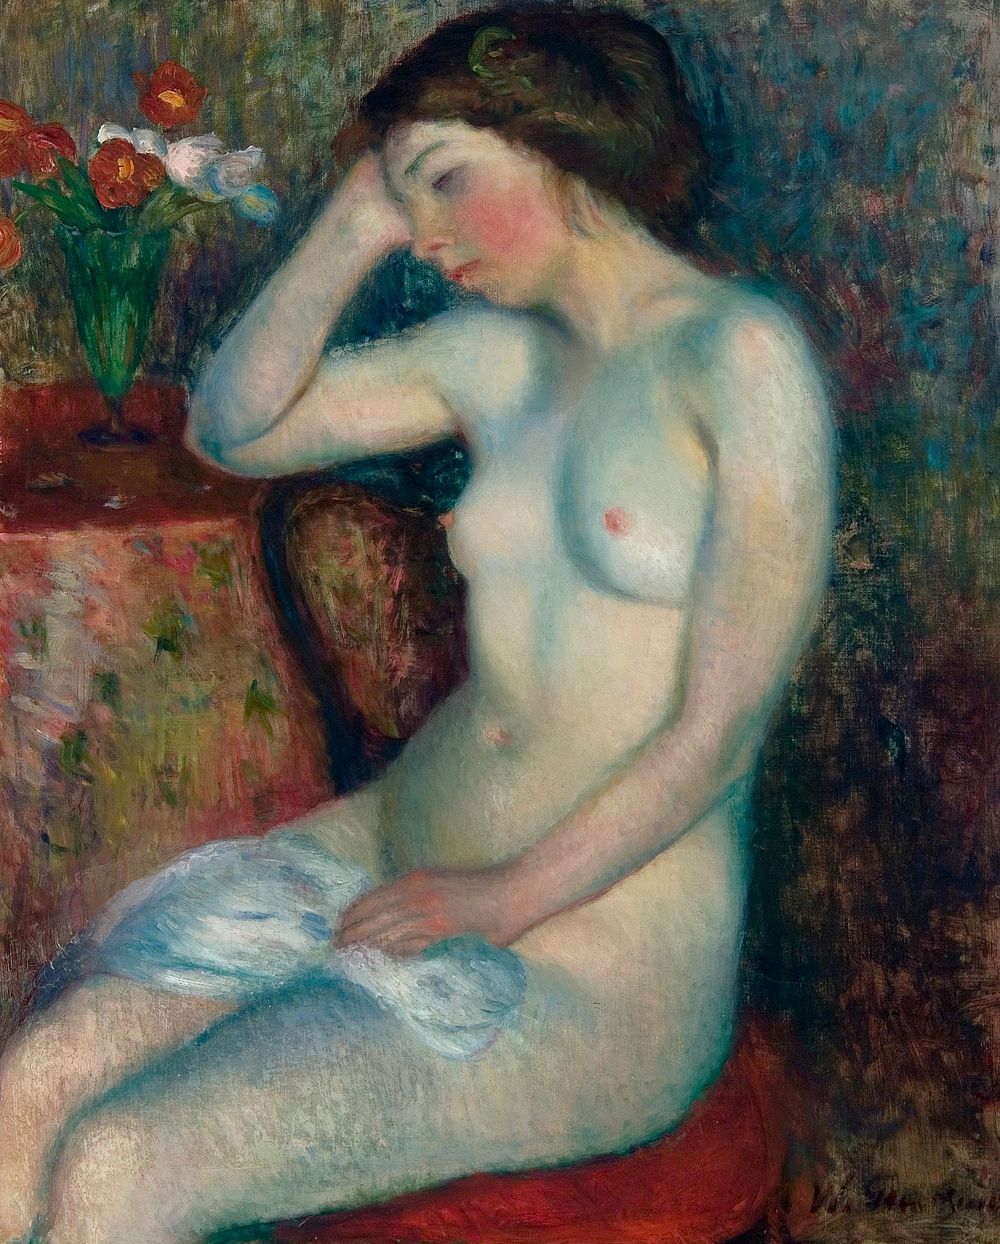 Sleeping Girl by William James Glackens